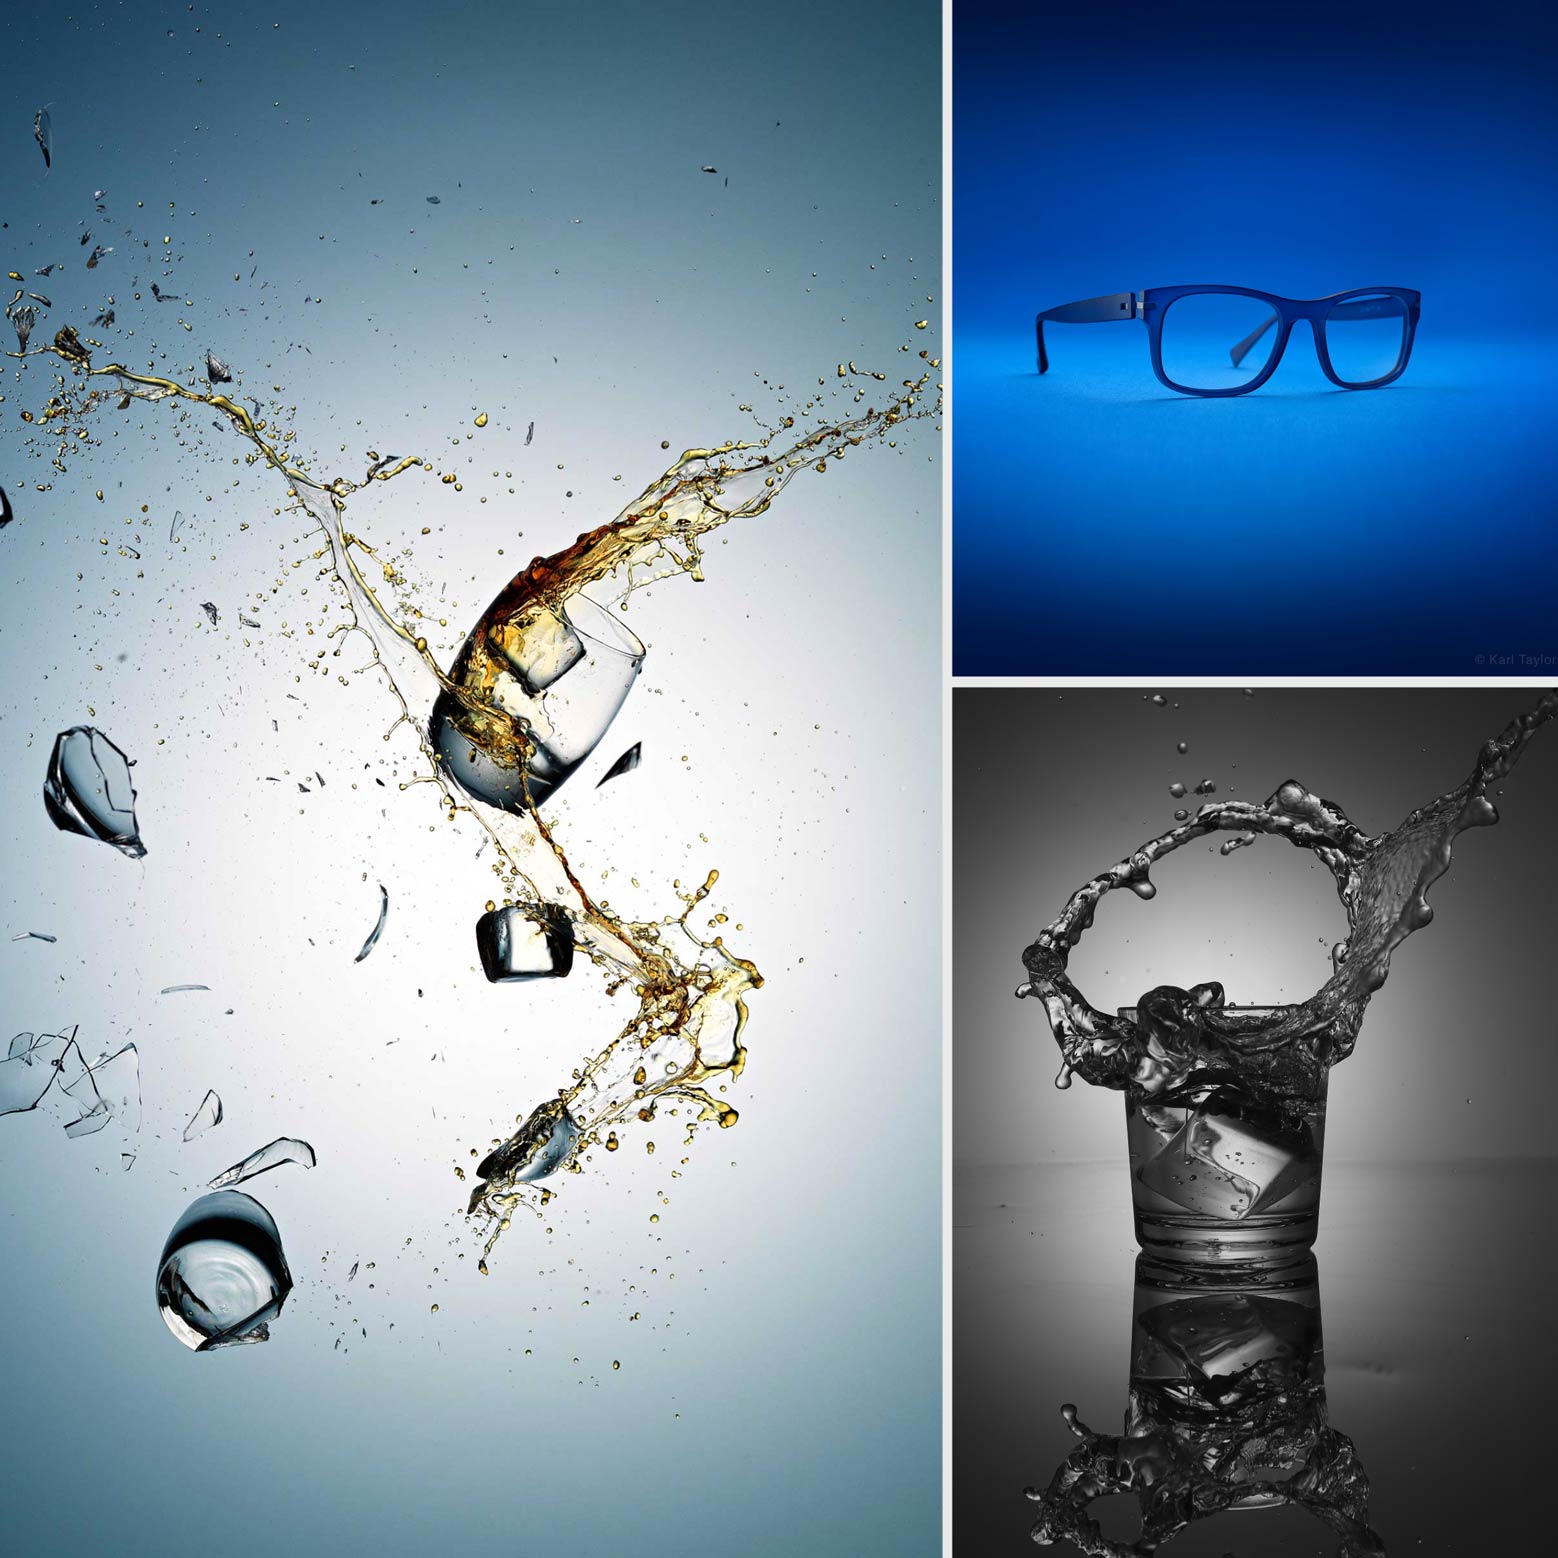 Photographs of glass